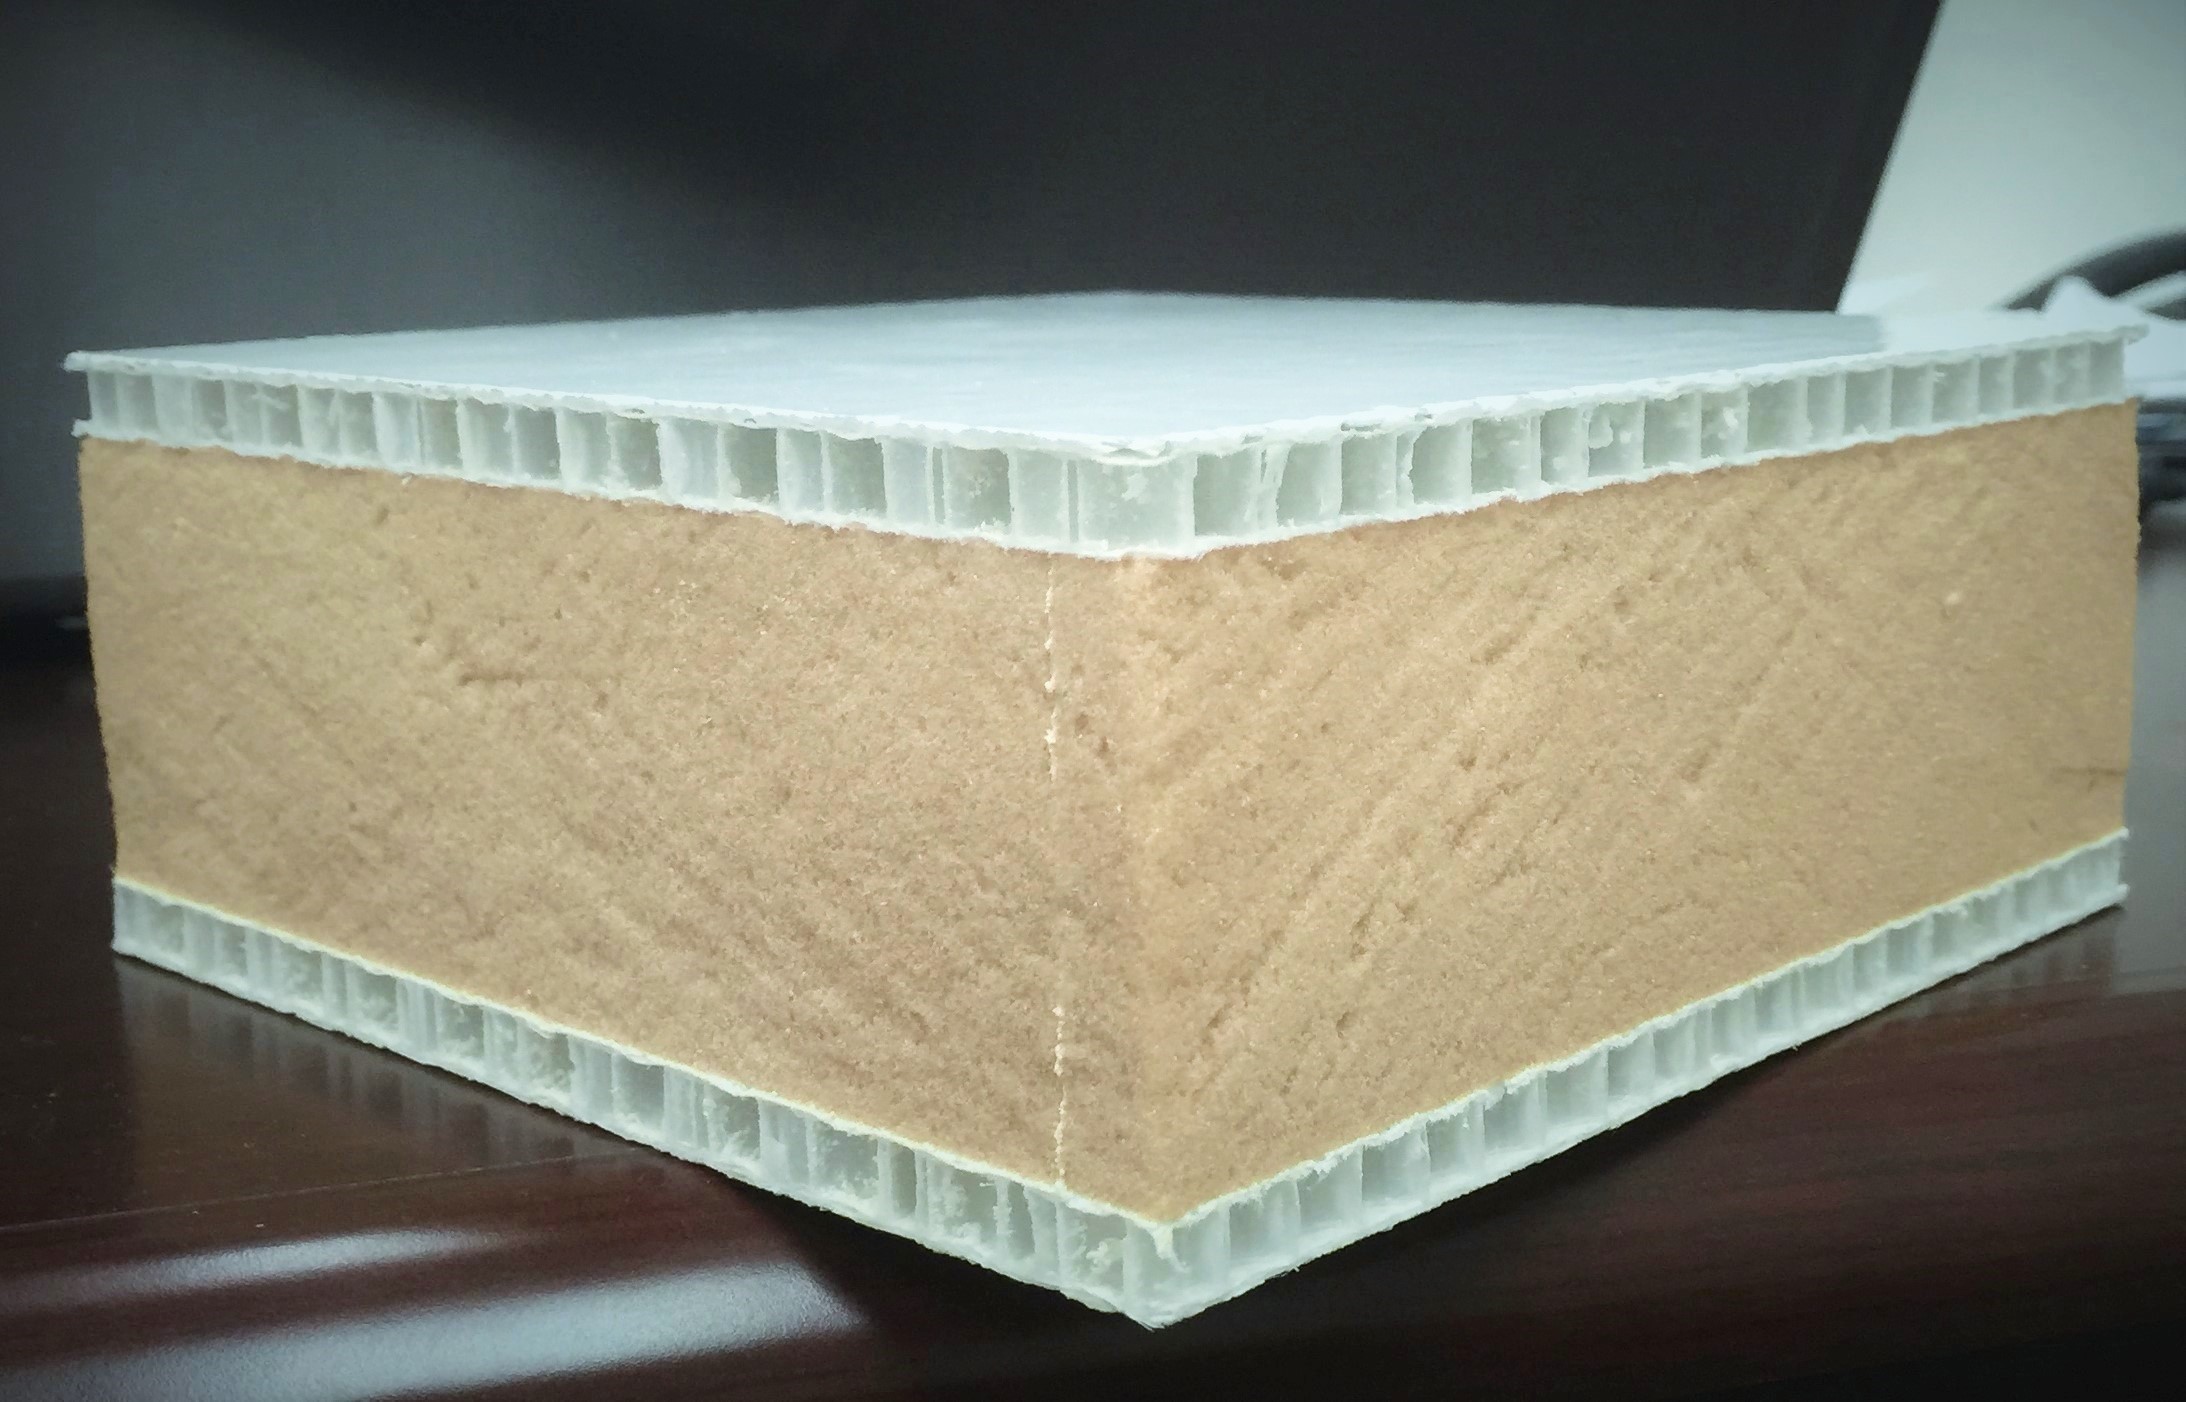 Reinforced high density foam cores for increased stiffness and strength.